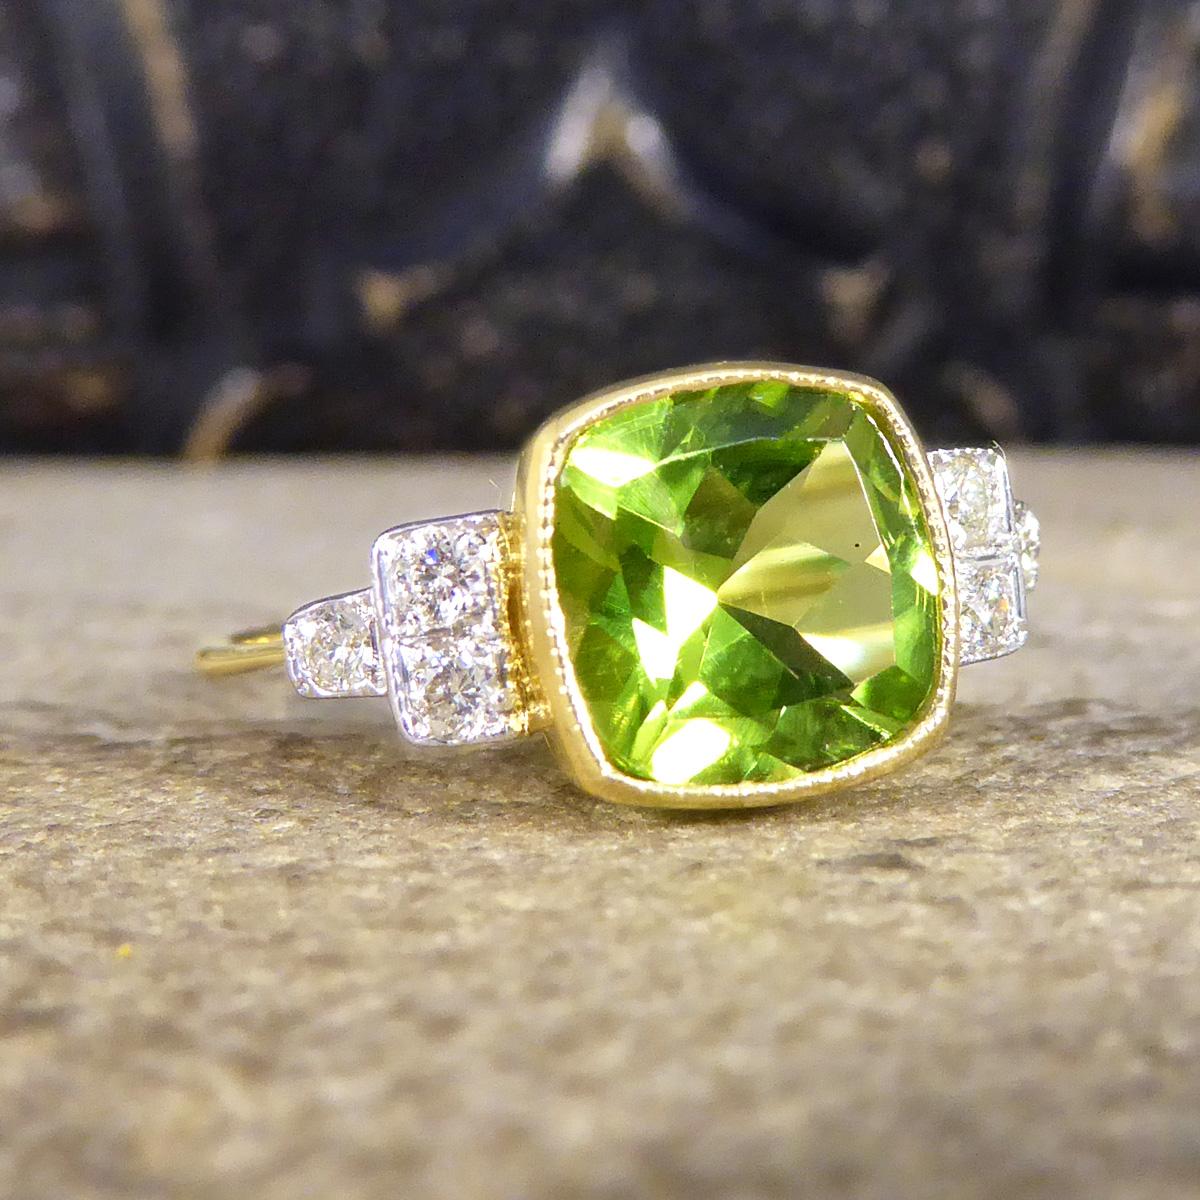 This absolutely stunning ring features a bright and vibrant Peridot in the centre weighing 2.12ct set in a collar setting with a slight milgrain edge. Sitting on either shoulder of the ring are a triangle of brilliant cut Diamonds, set in a